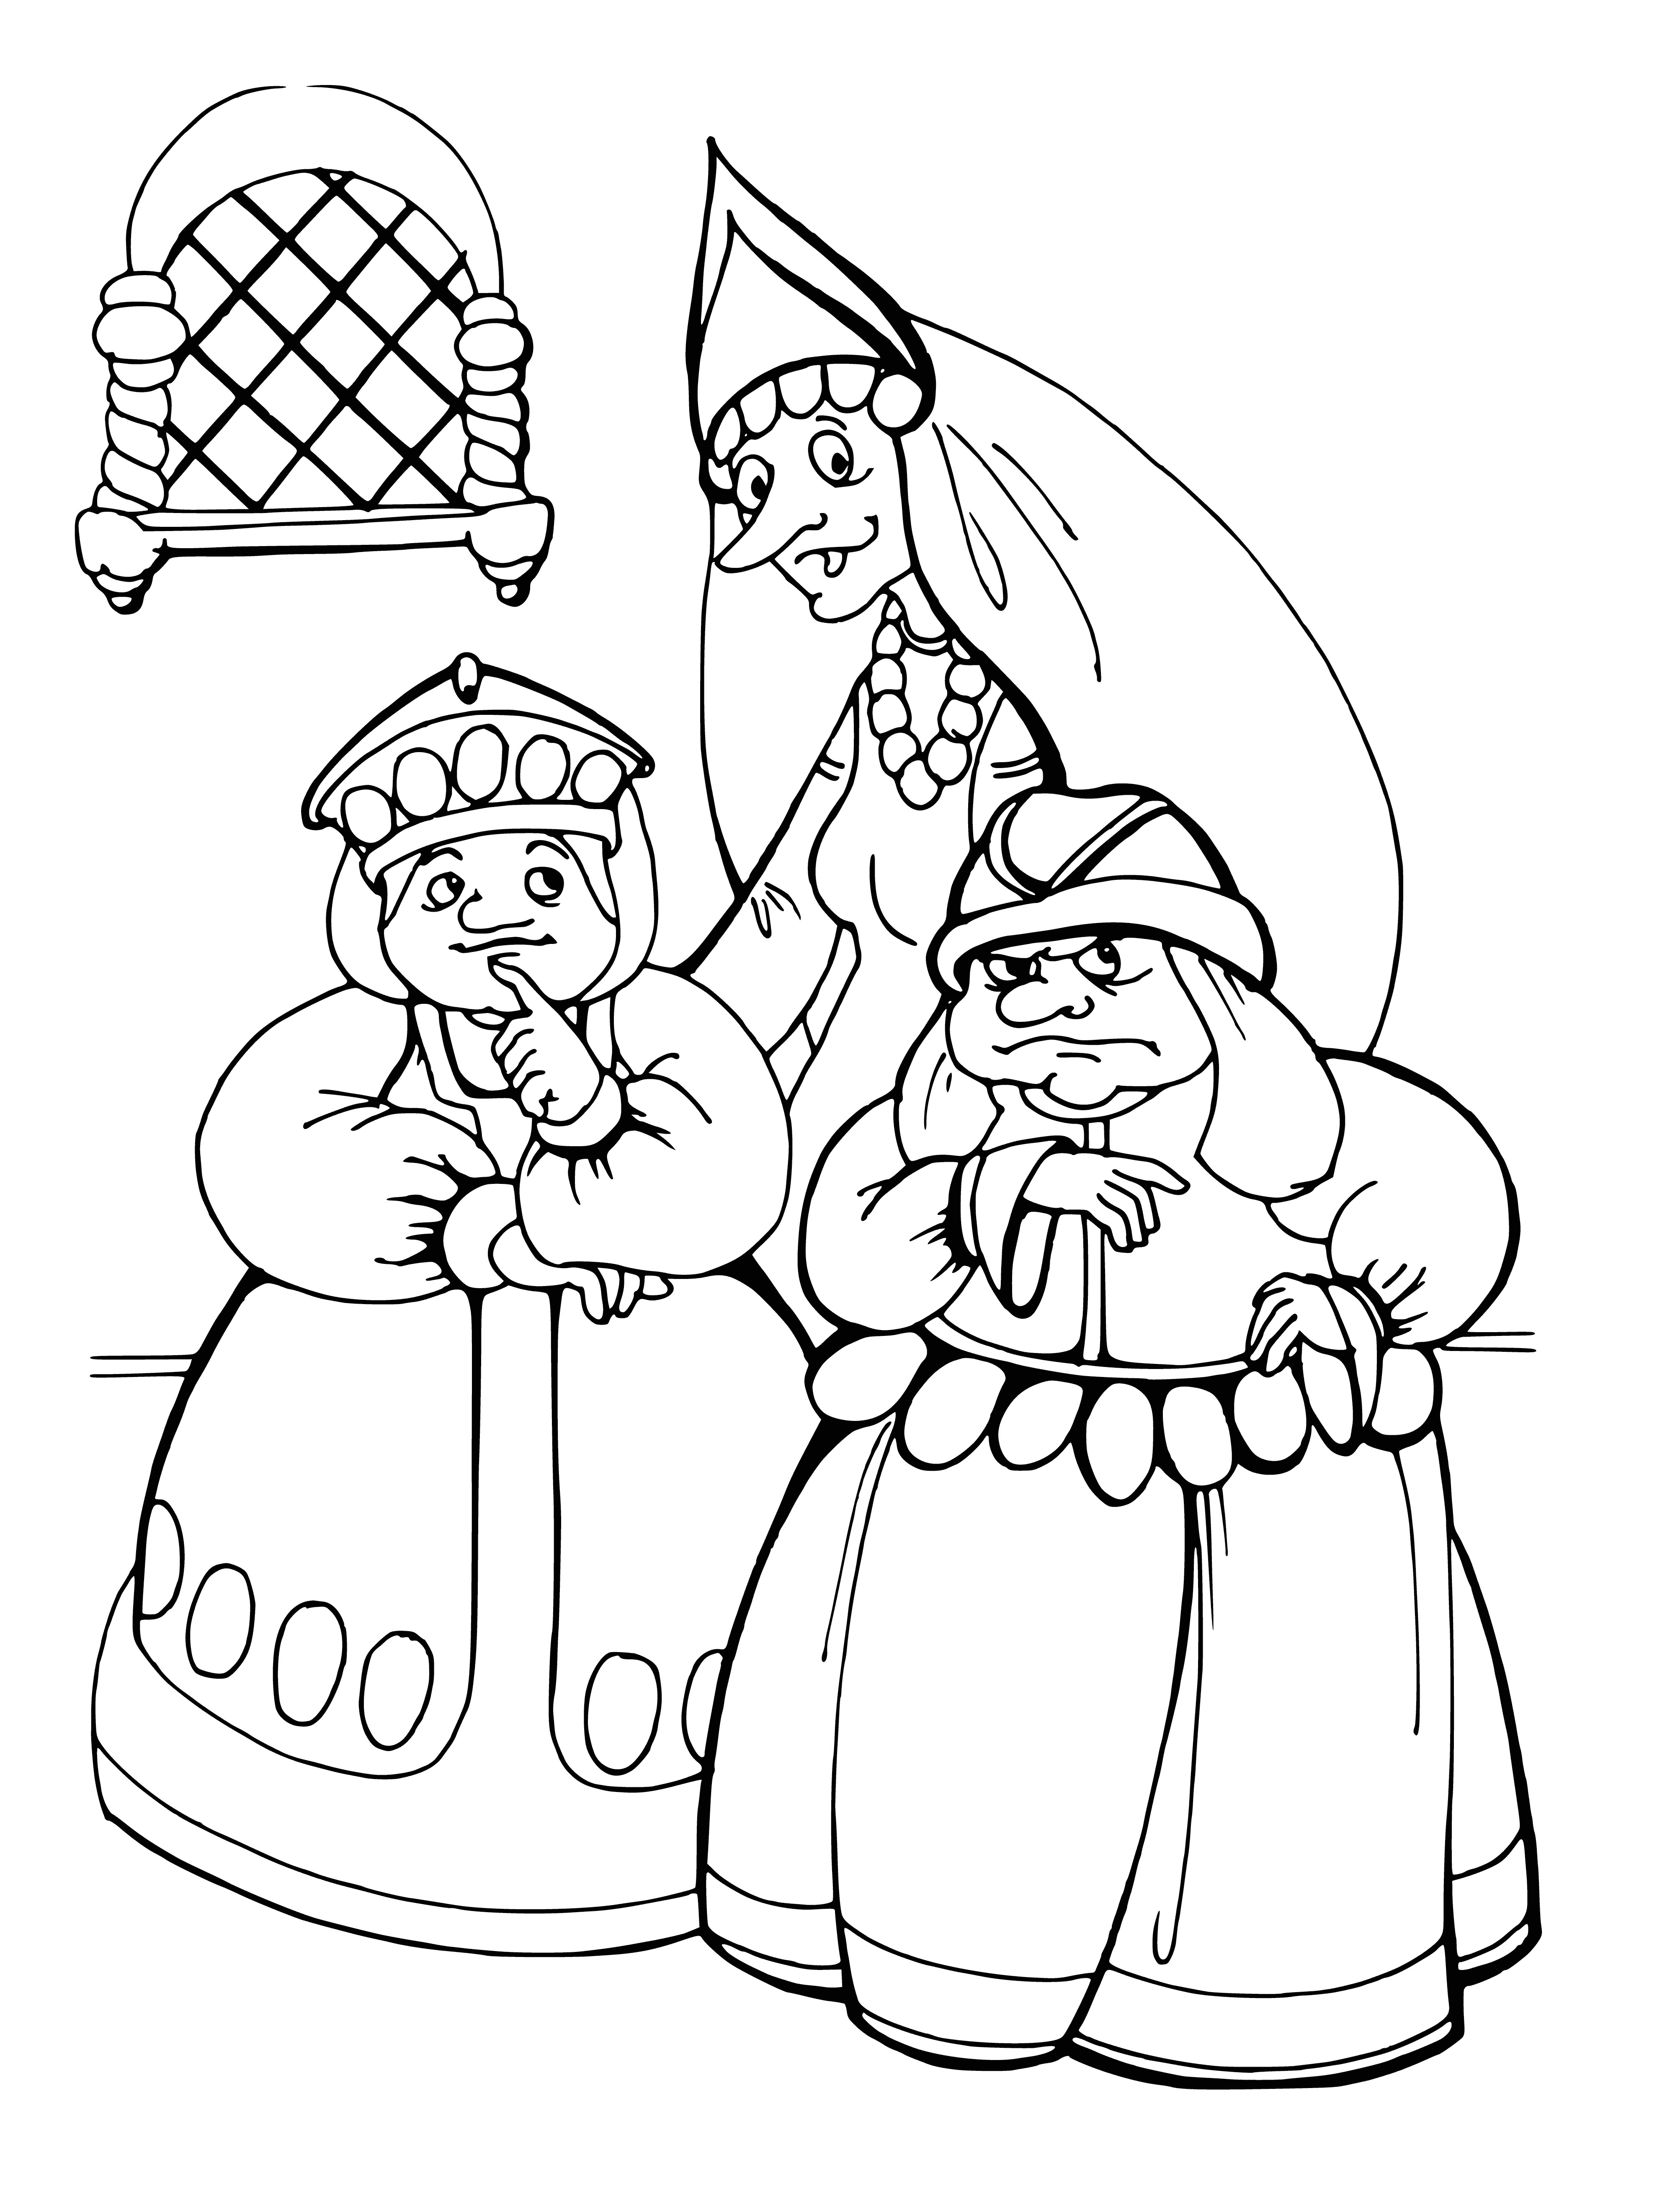 coloring page: Three women at table: two sisters arguing, one older mother-in-law trying to calm them.